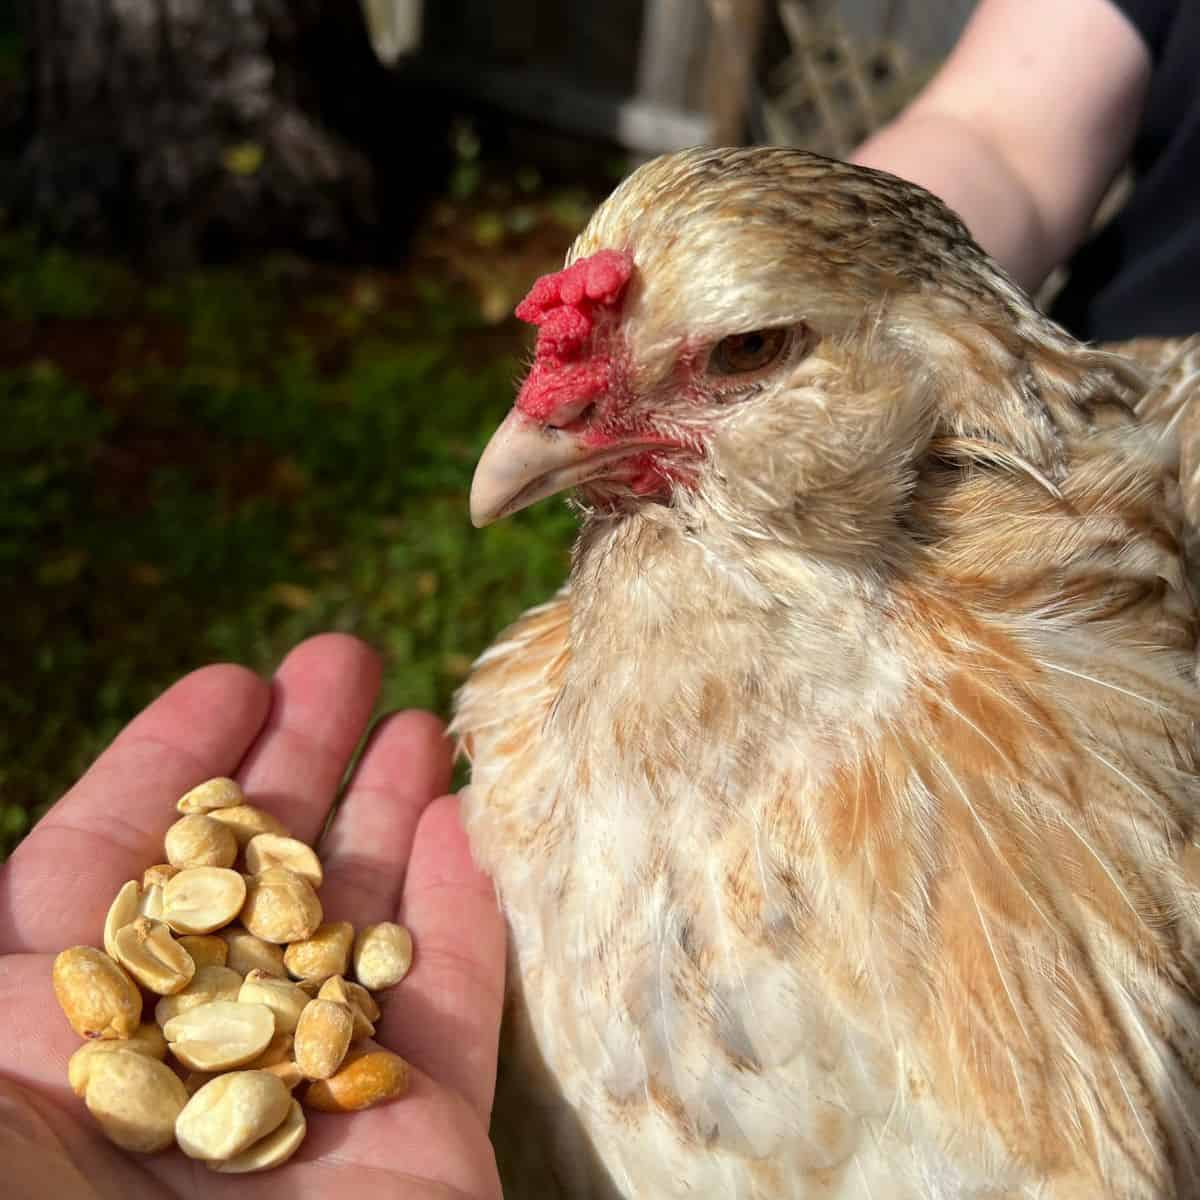 Chicken being held next to handful of peanuts.